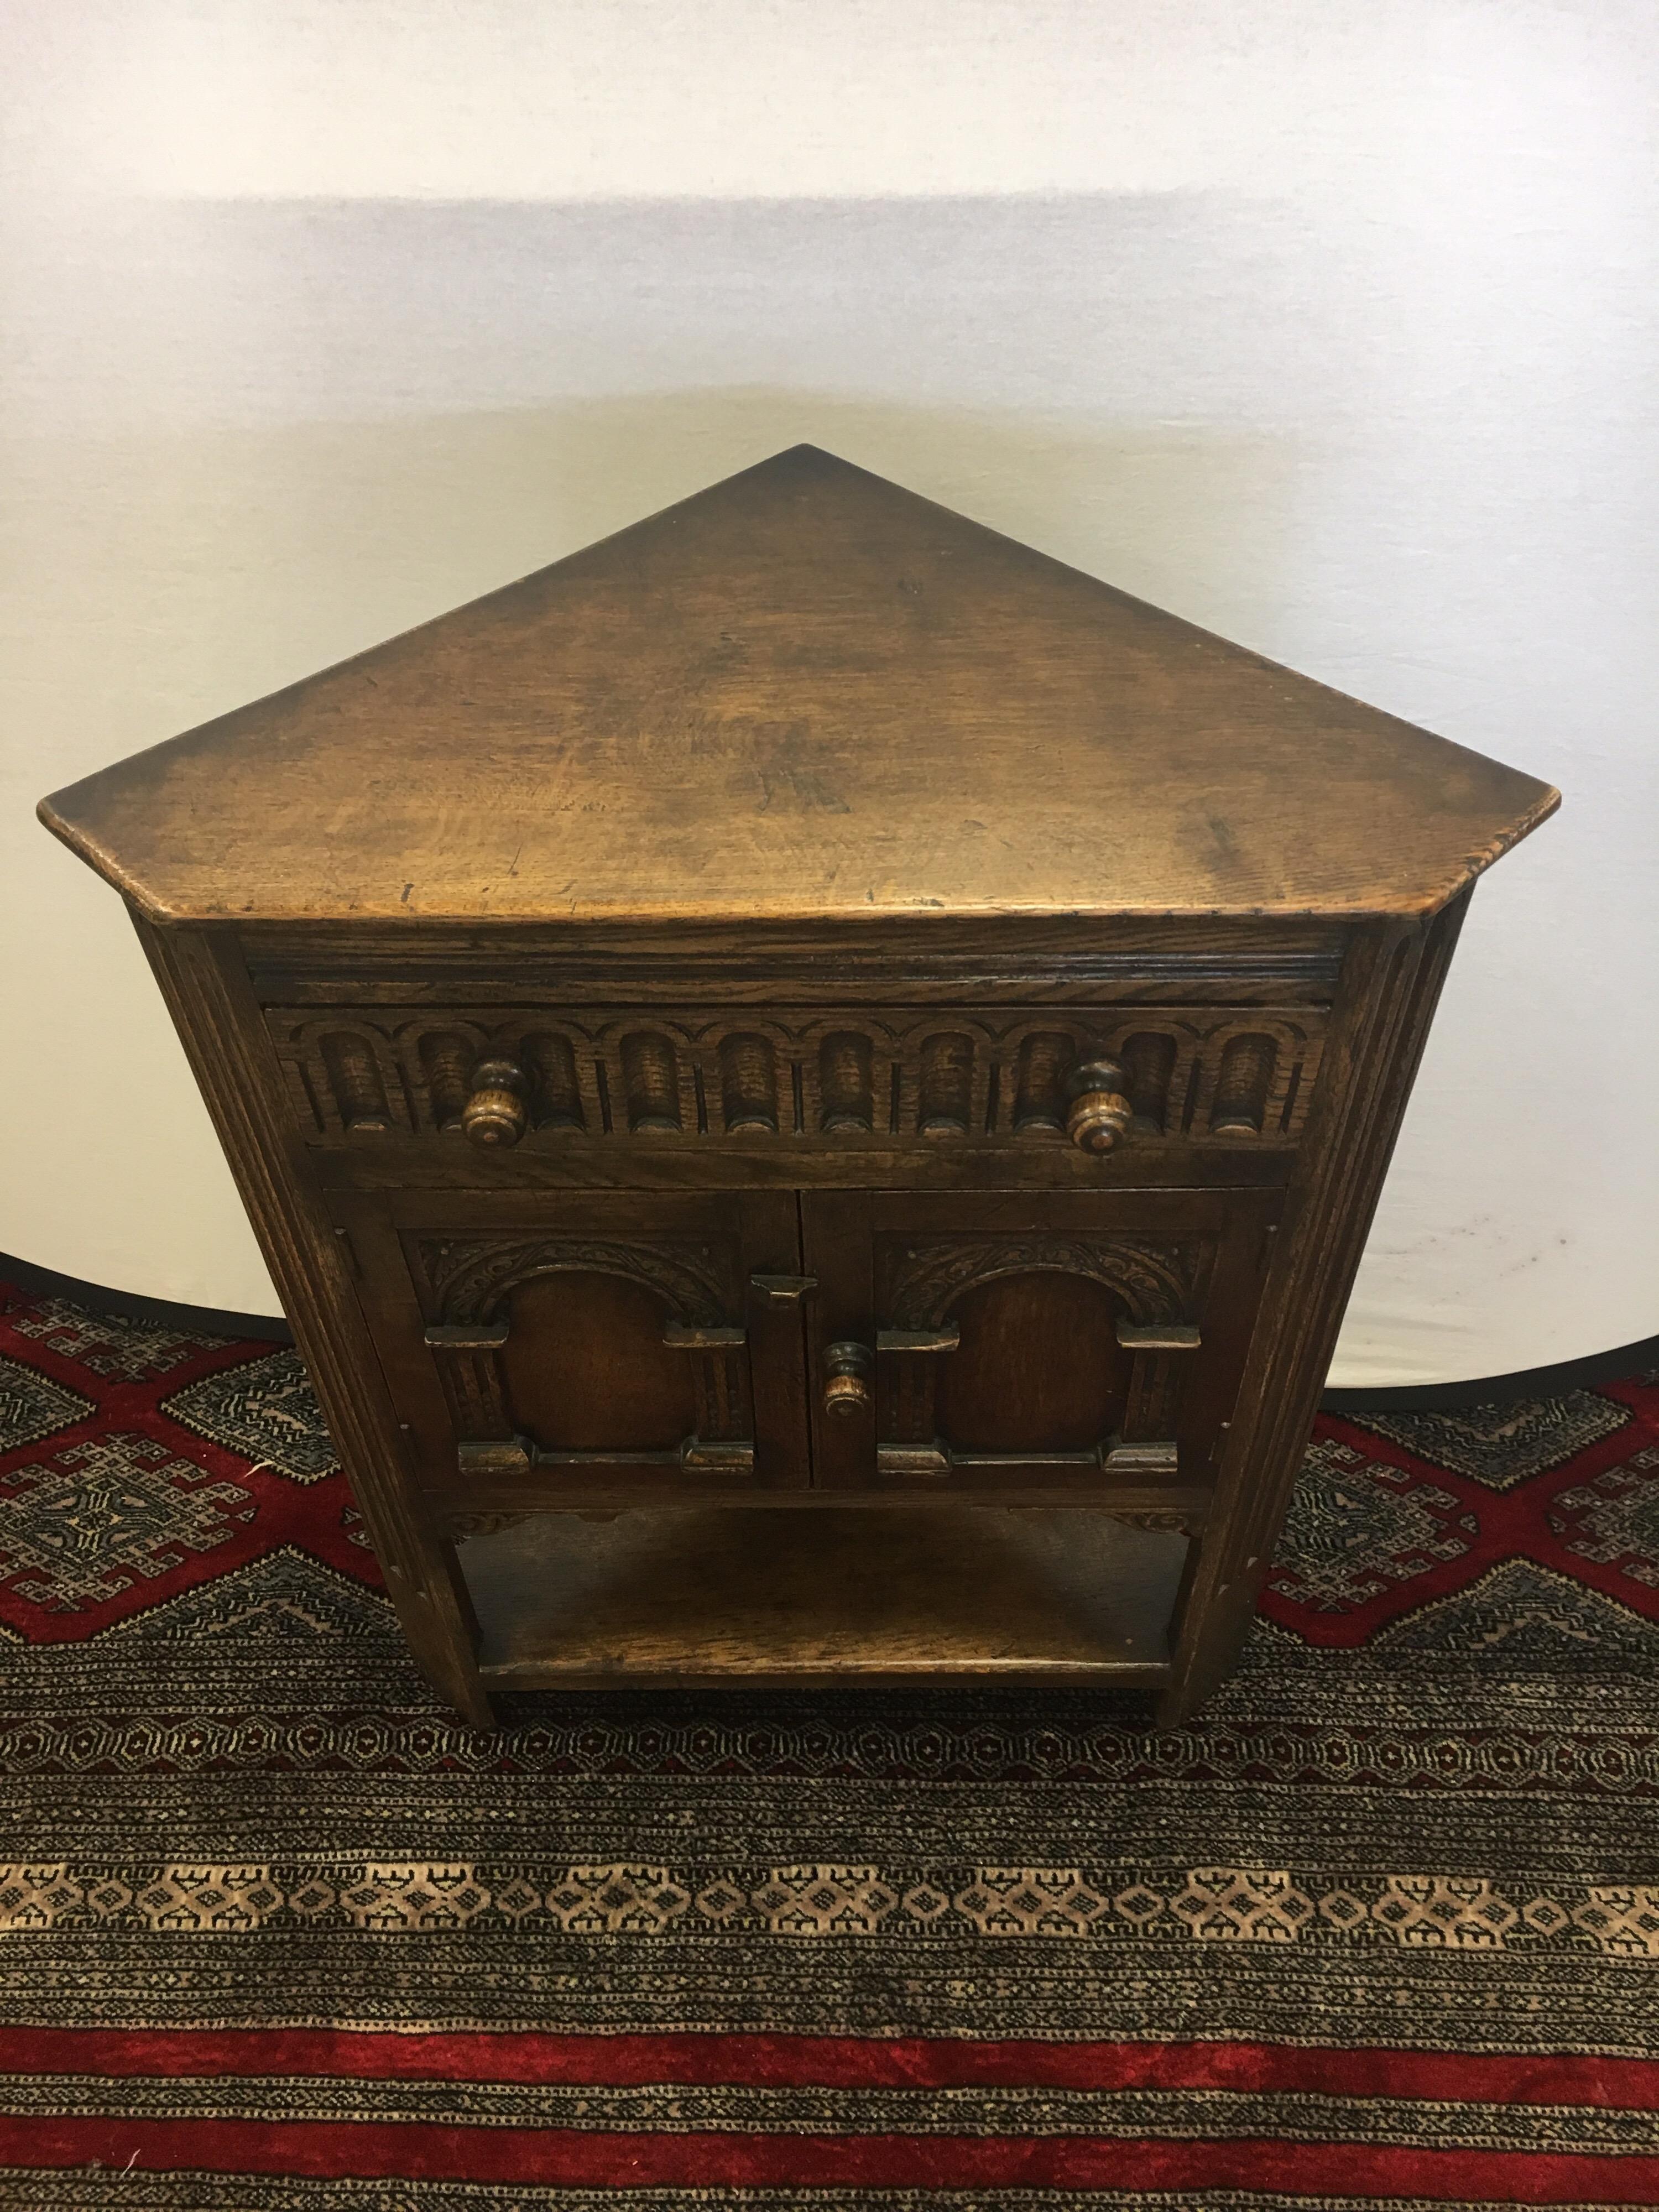 Old dark oak corner table cabinet from famed George Fleet & Co. Ltd. of Stoke on Trent in England and hallmarked on back. Features carved doors and detail. Has top drawer and double doors that open for storage. It’s small size can fit in any space.